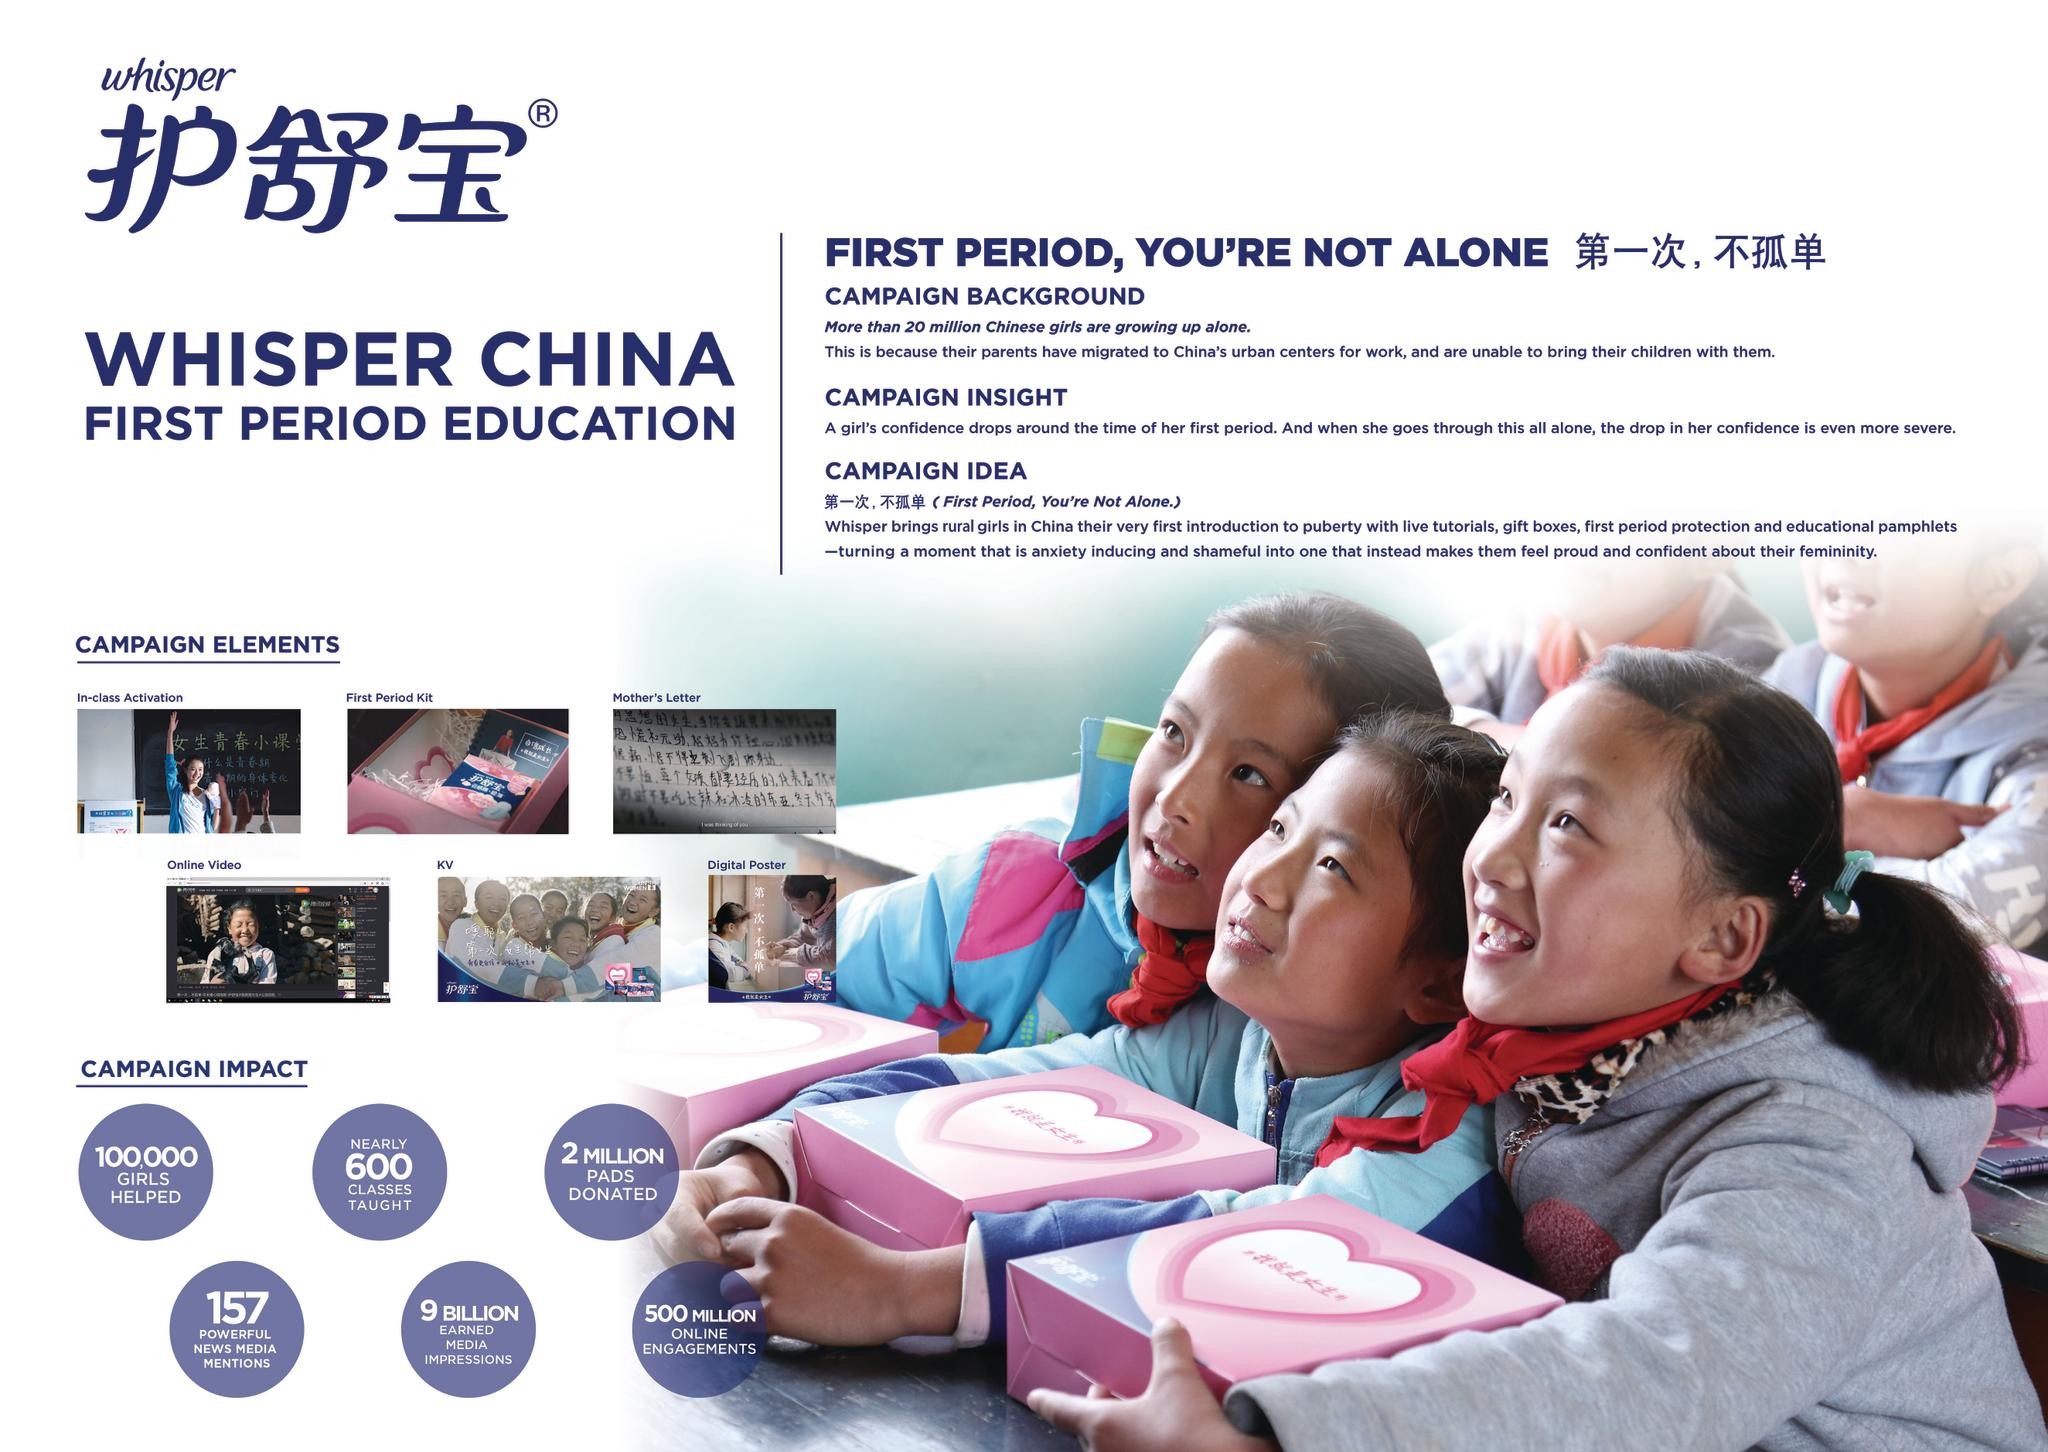 Whisper China First Period Education